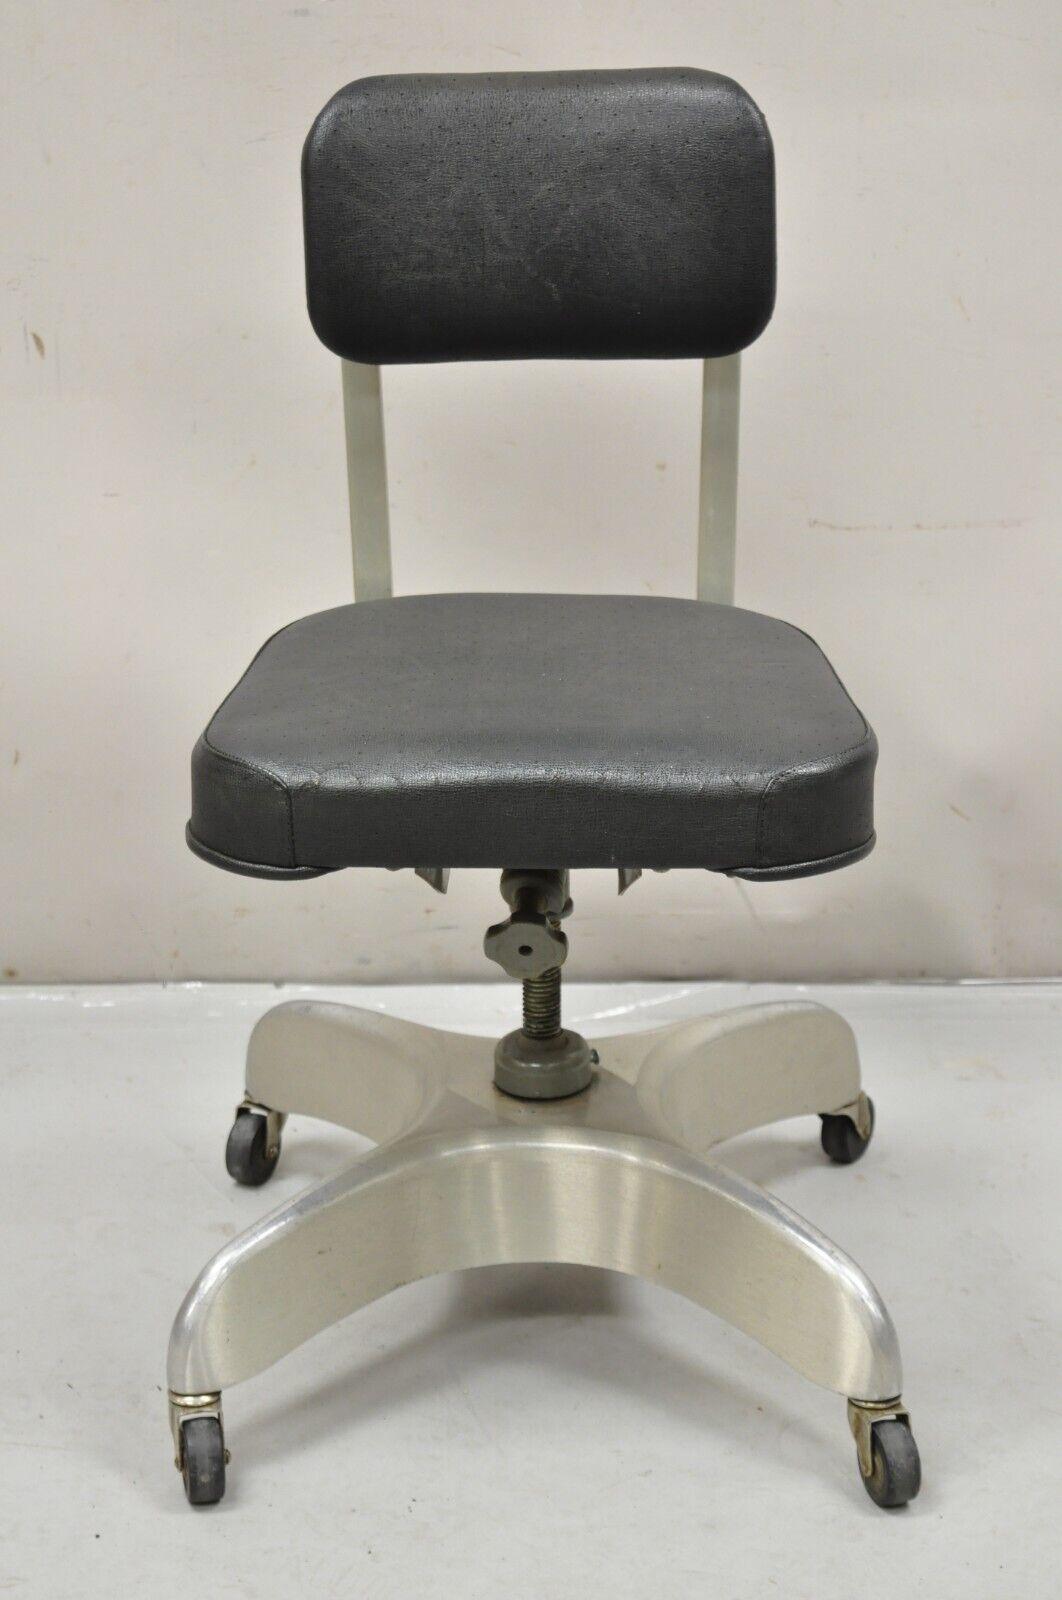 Vintage Emeco Corp Art Deco Brushed Aluminum Black Swivel Office Desk Chair. Item features an adjustable height, sculpted aluminum base, black vinyl upholstery, rolling casters, original label. Circa  Early to Mid 20th Century. Measurements: 32